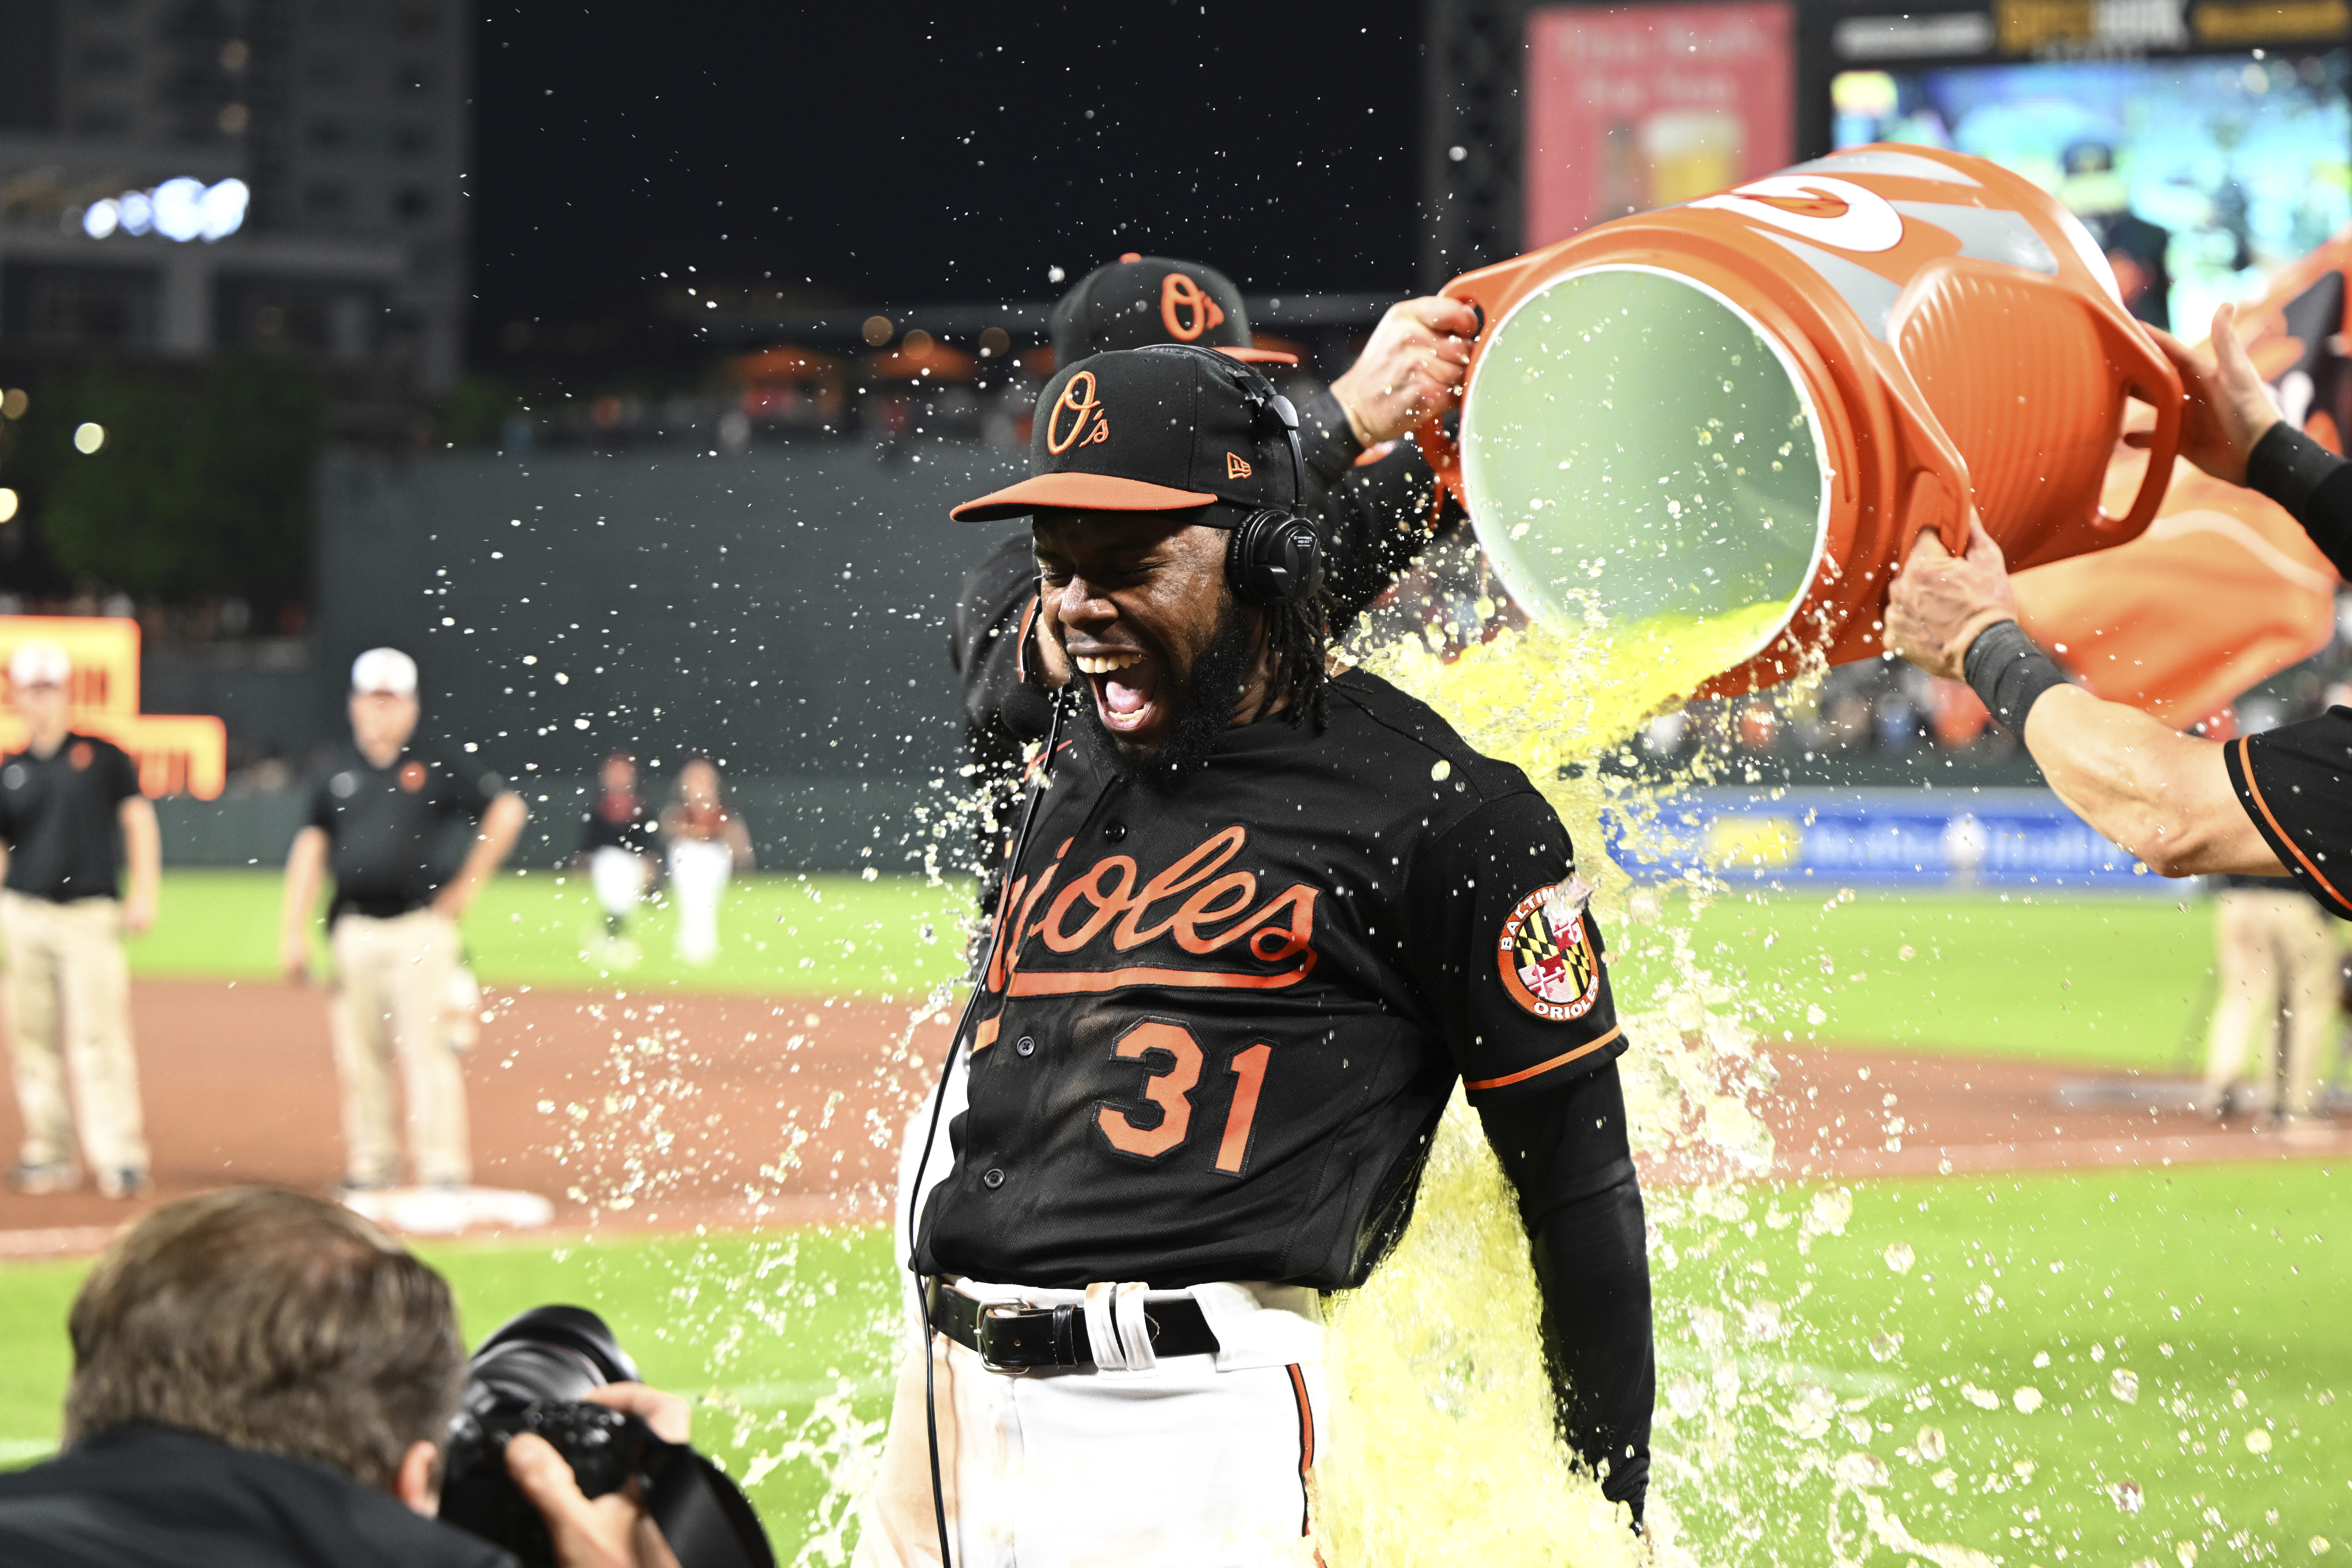 Cedric Mullins hits for the cycle, getting 'Bird Bath' hyped up